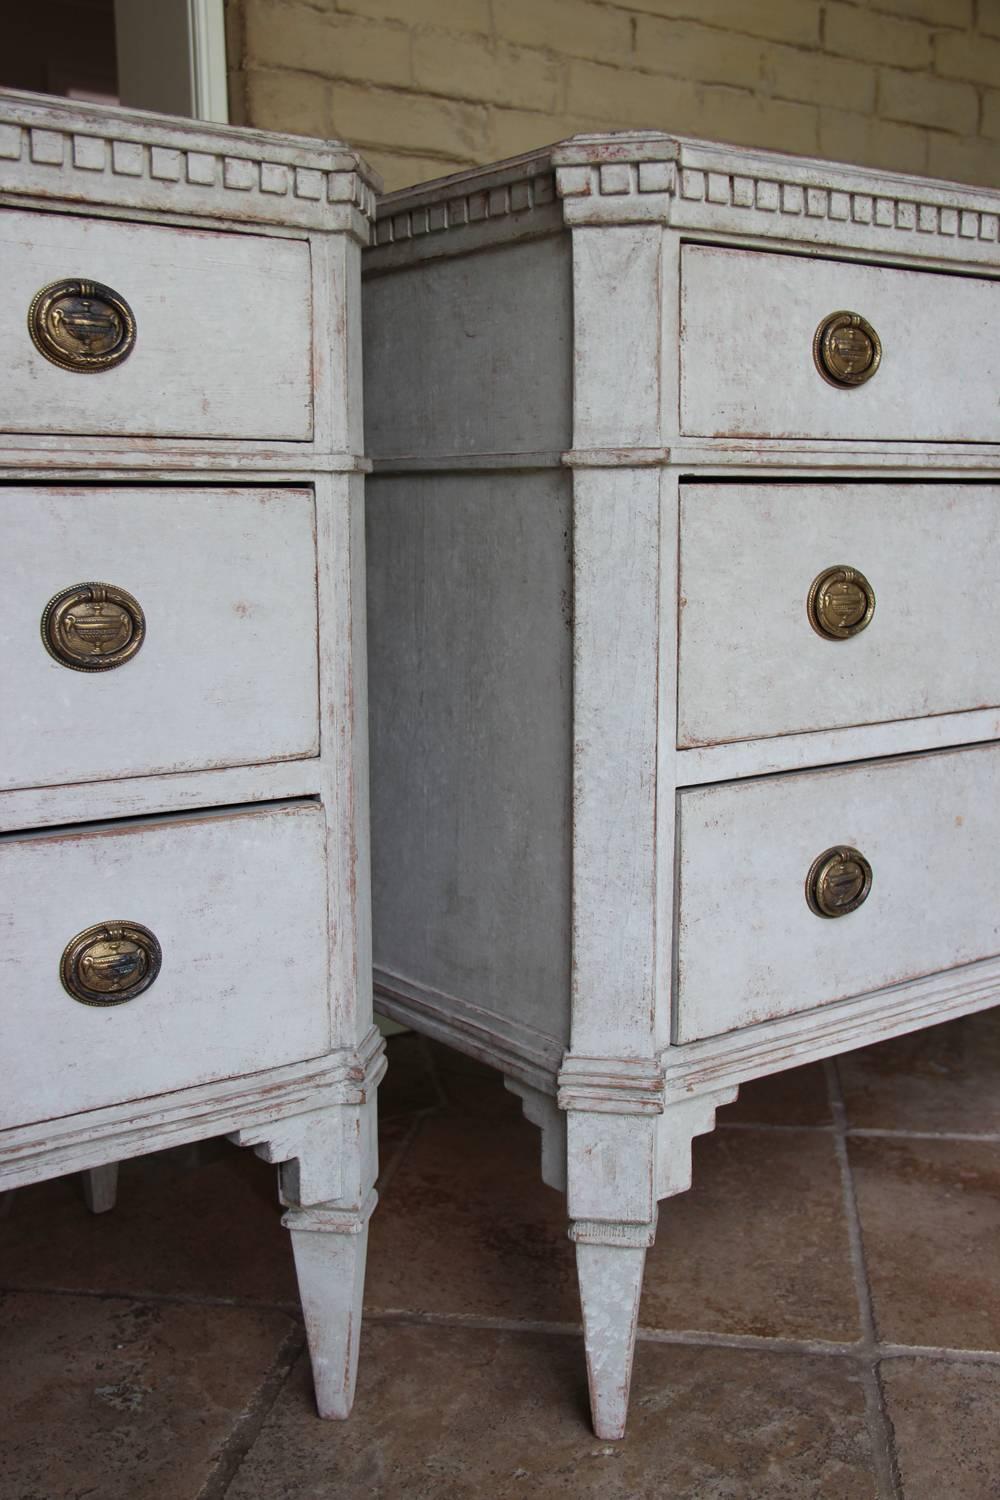 An elegant neoclasical pair of Swedish painted commodes in the Gustavian Style. Each chest has three drawers, brass hardware, and original locks and keys. The corner posts are canted. The shaped top is framed by dentil molding and the chests rest